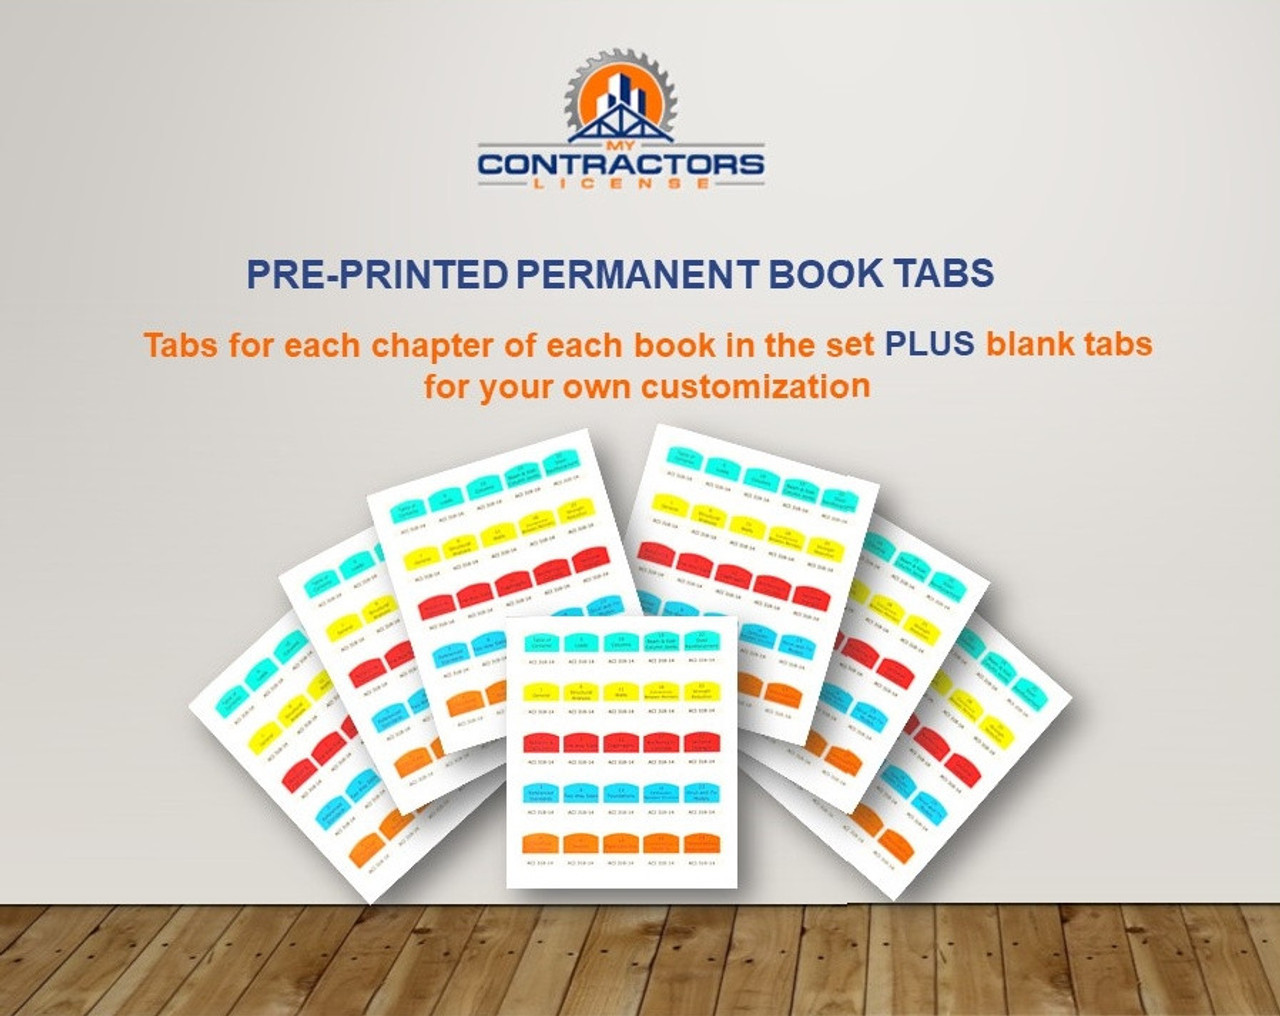 SC Wood Frame Structures Pre-Printed Book Tabs